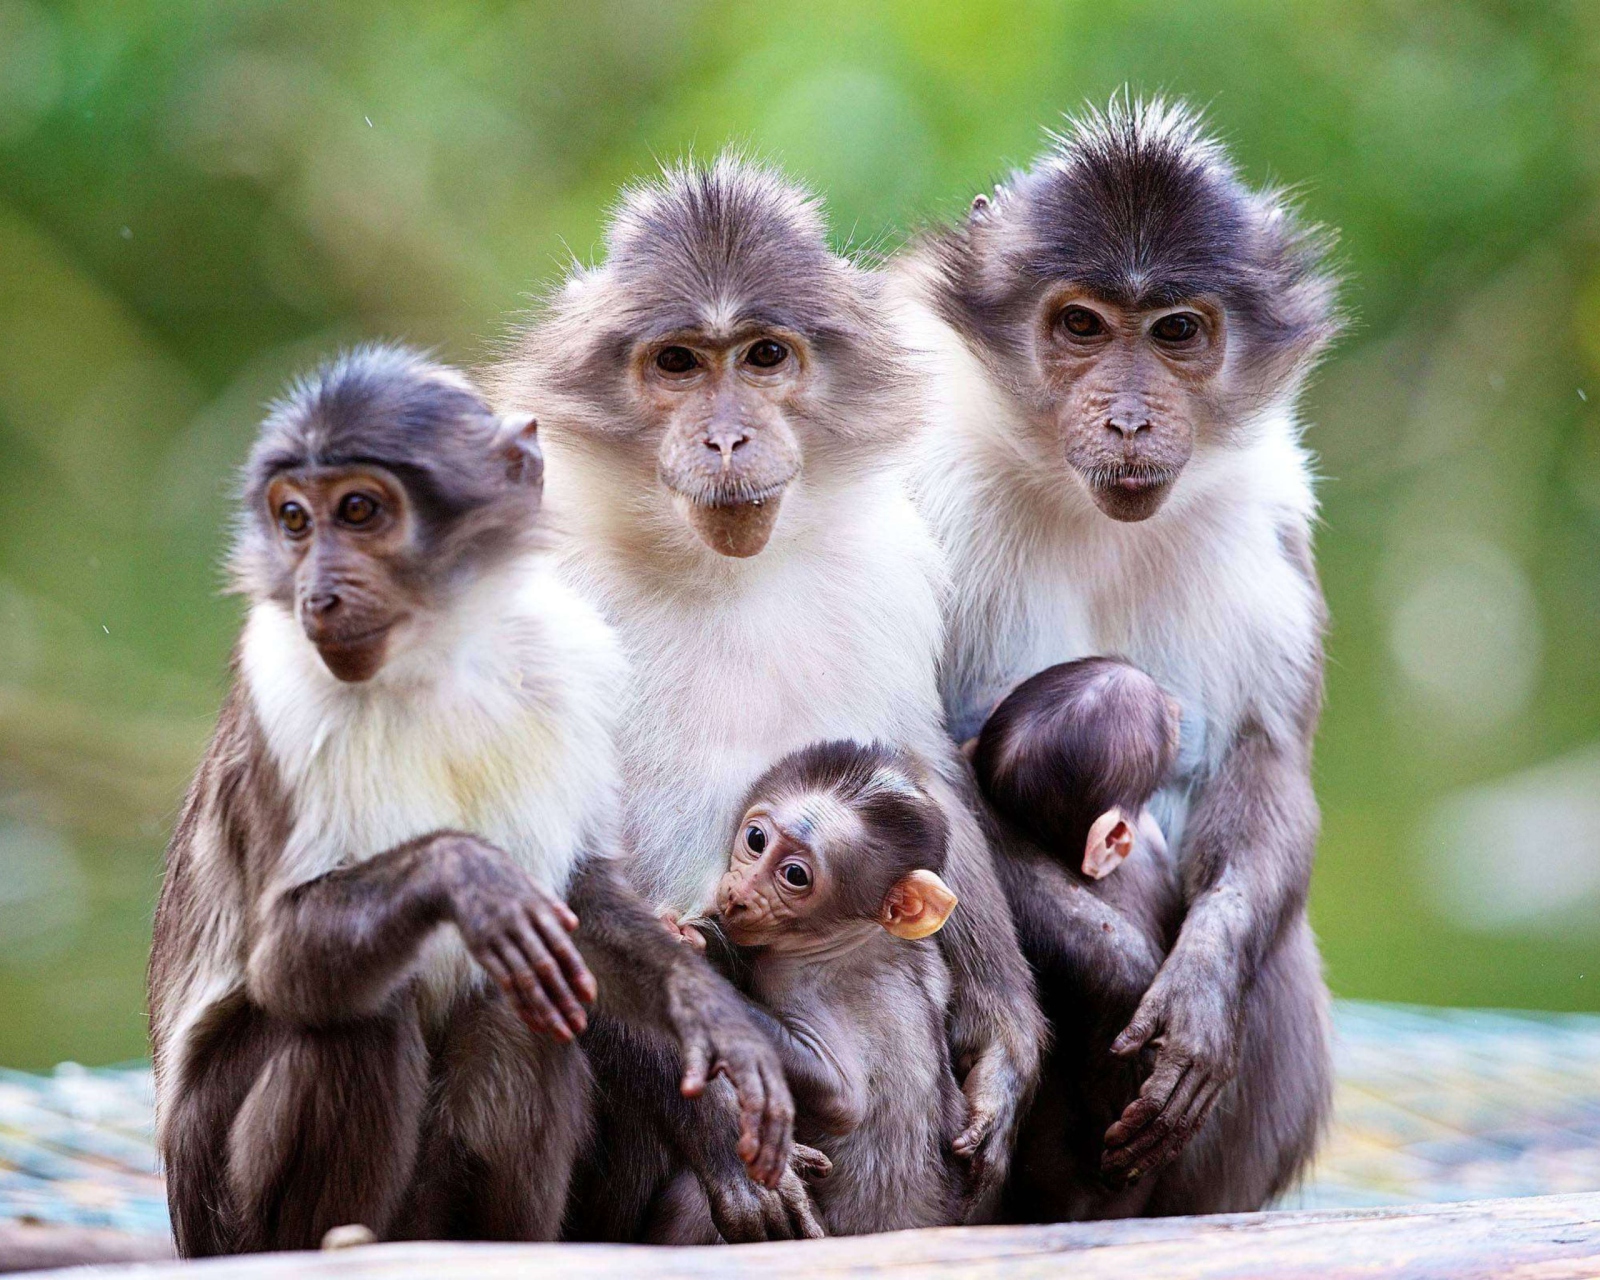 Funny Monkeys With Their Babies screenshot #1 1600x1280